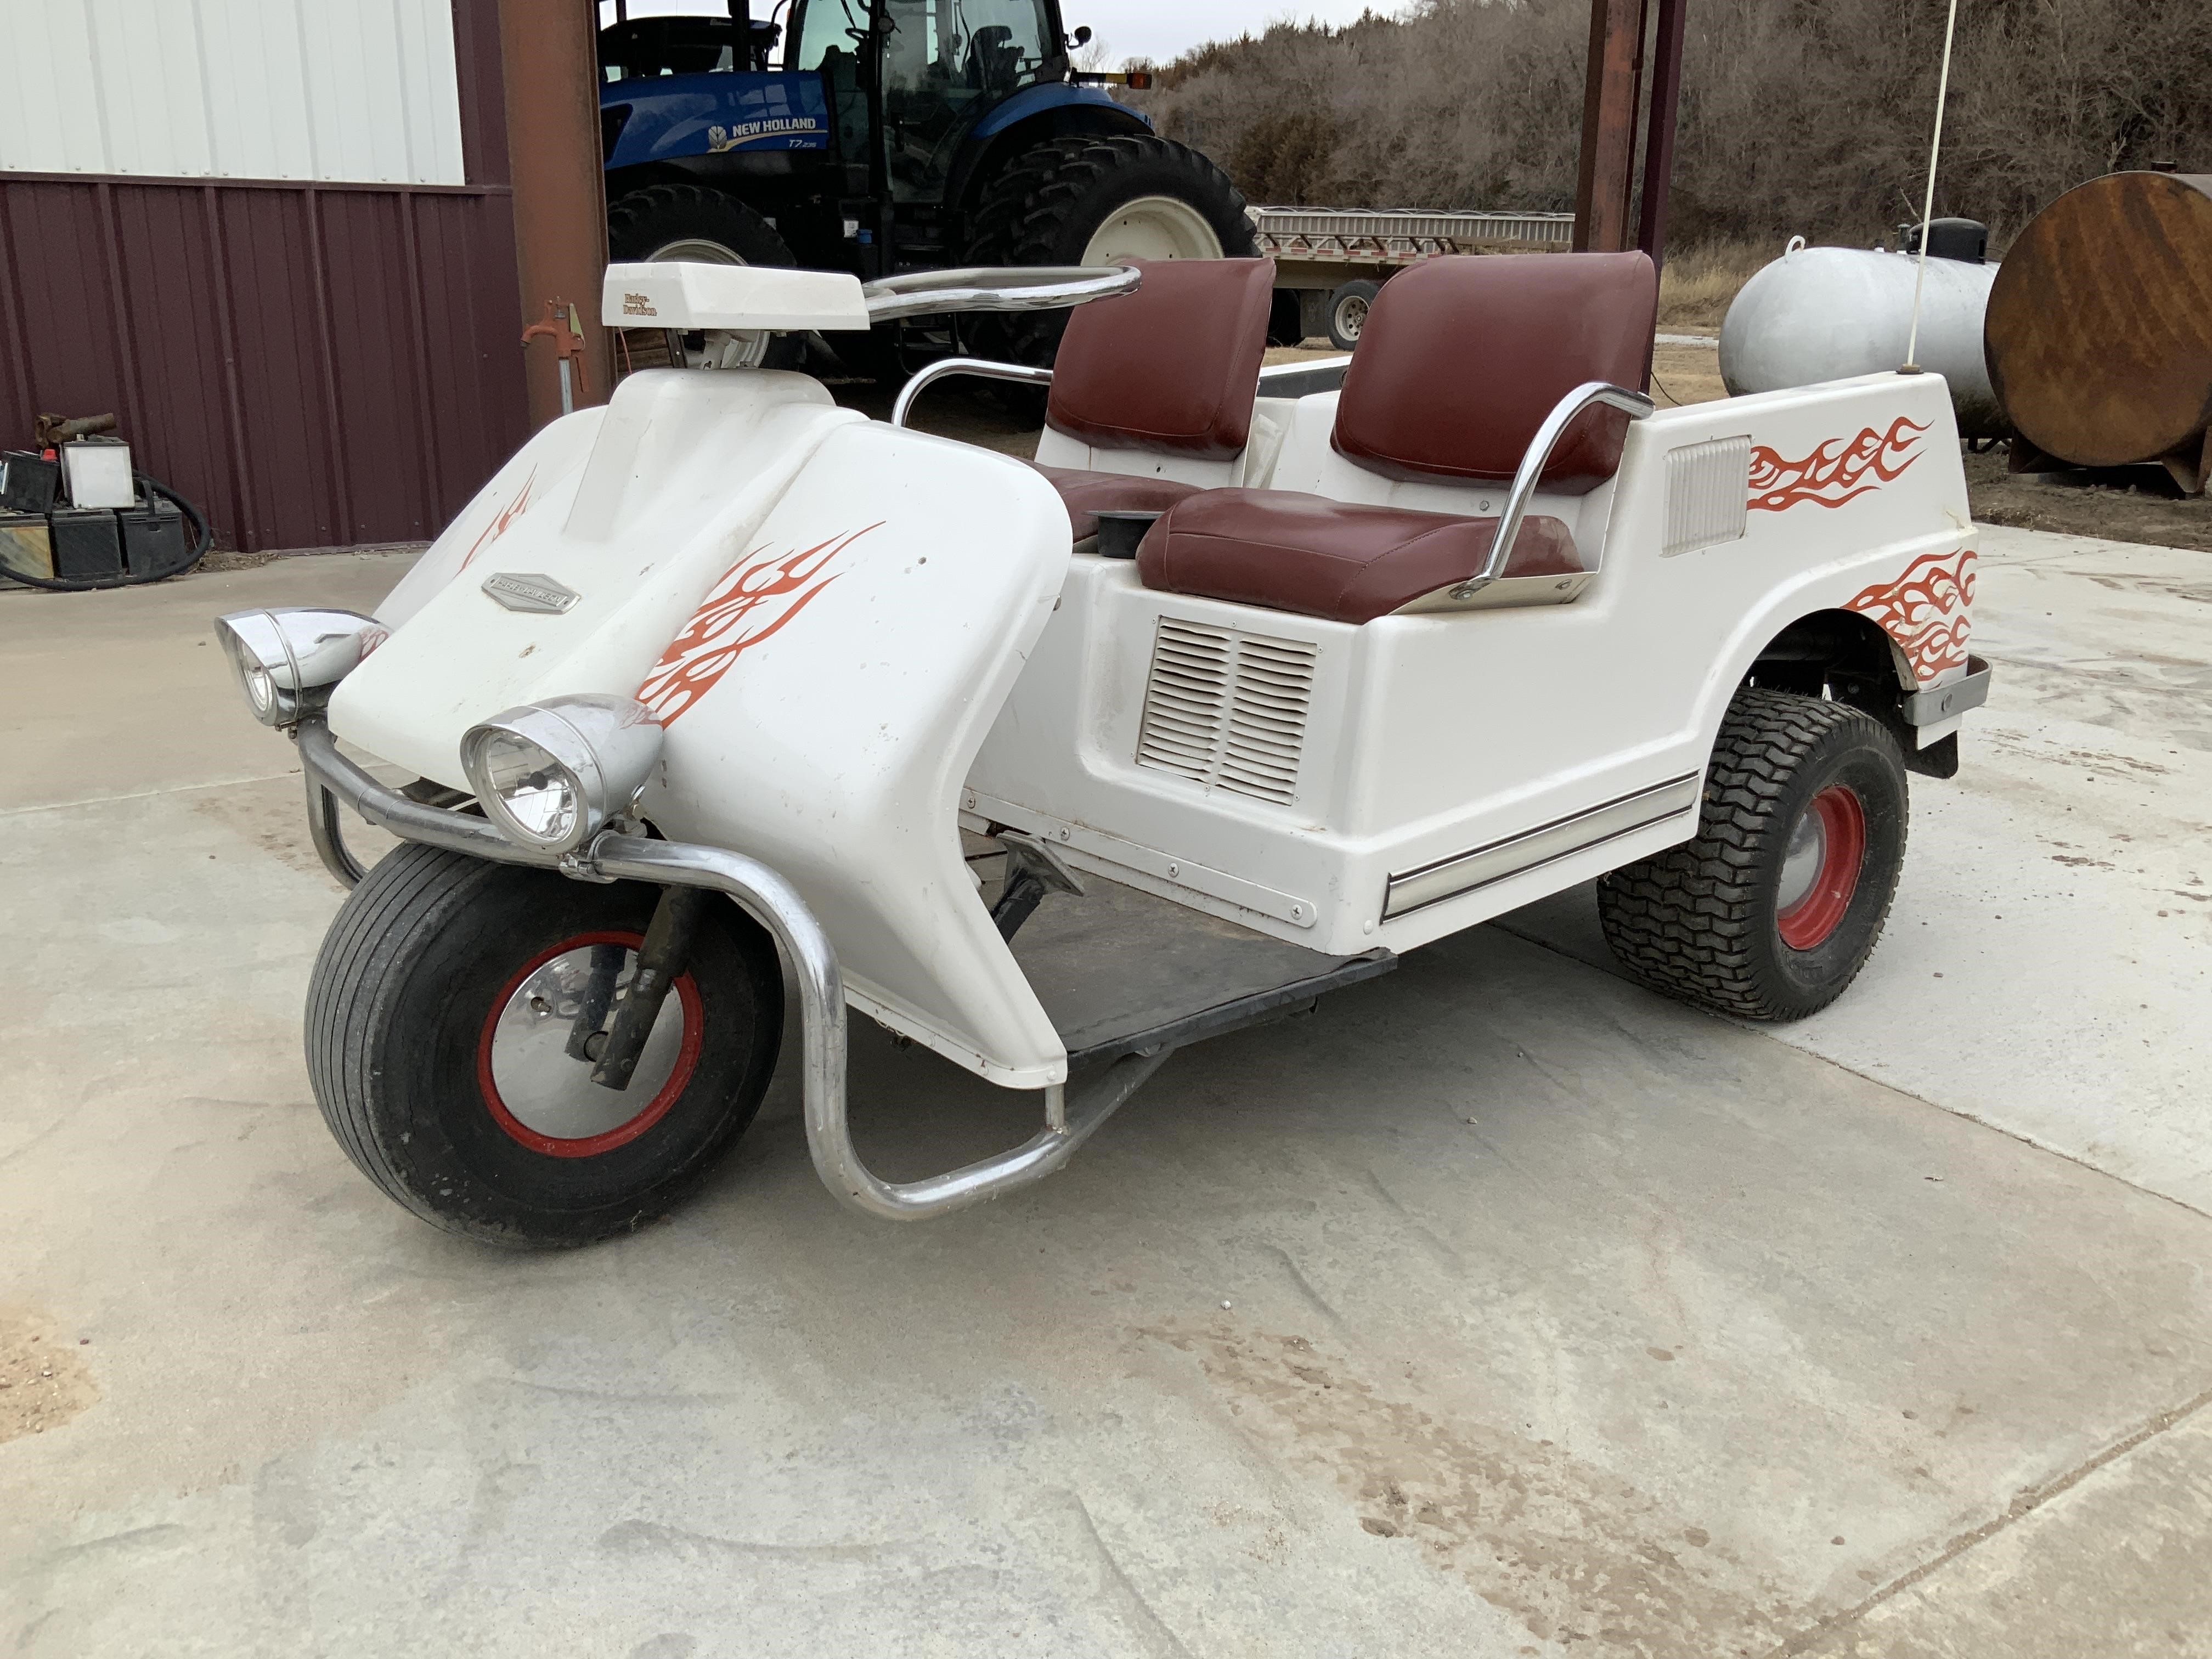 What Year Is My Harley Davidson Golf Cart 